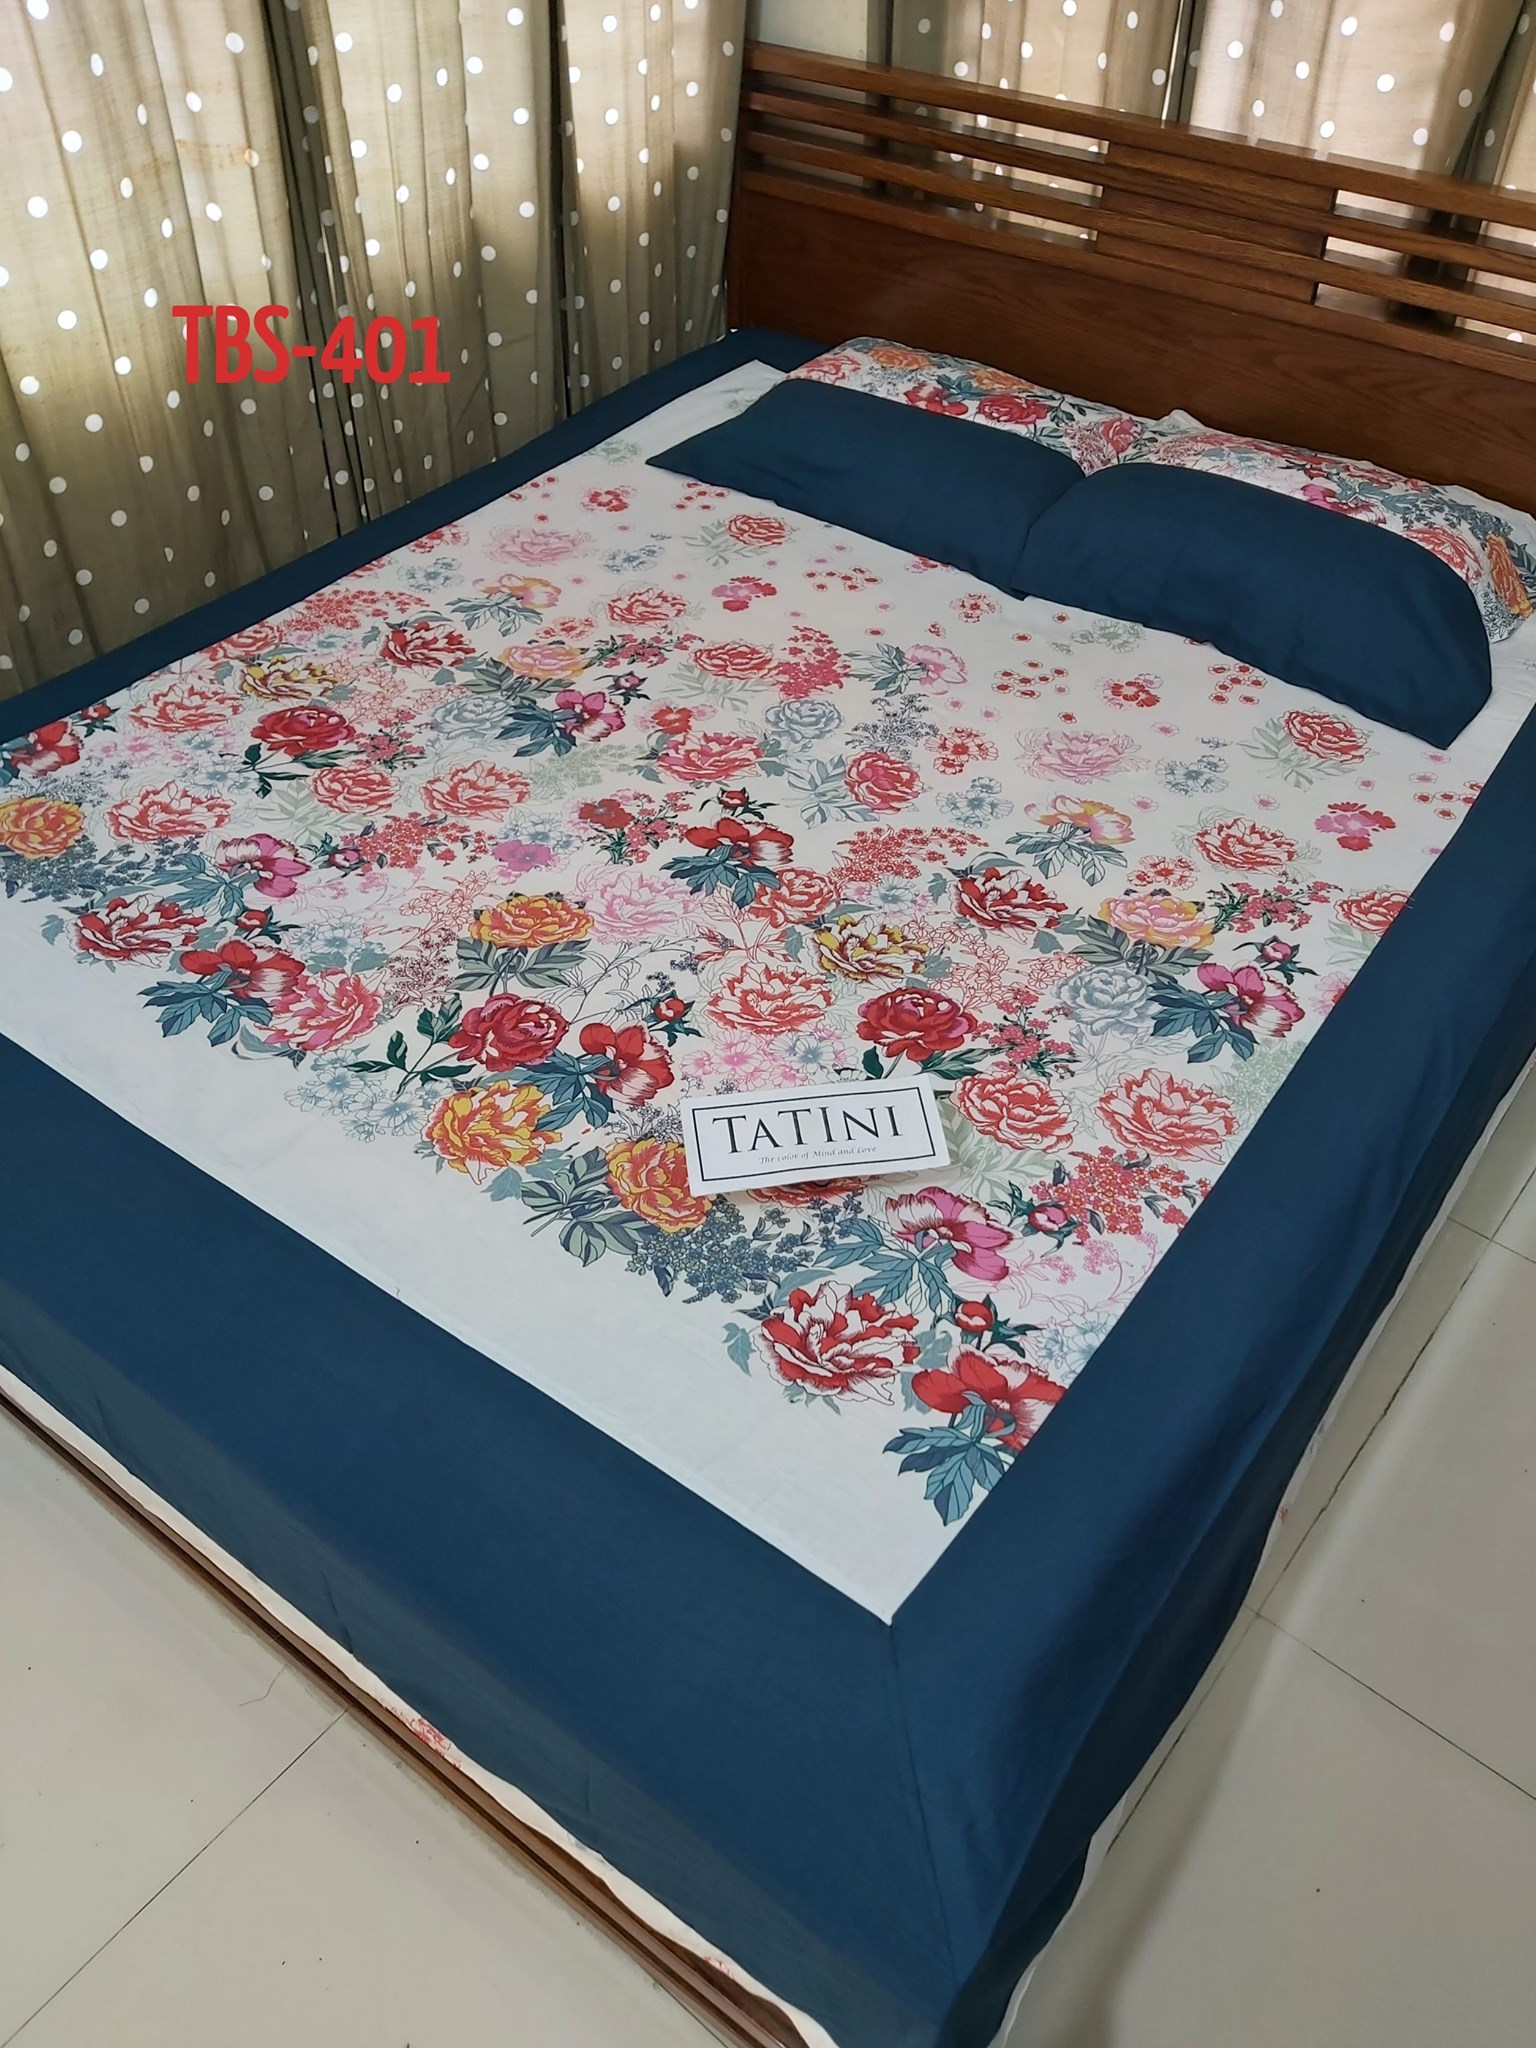 100% COTTON BED SHEET WITH PIKKOW COVER from WF TRADE CORPORATION